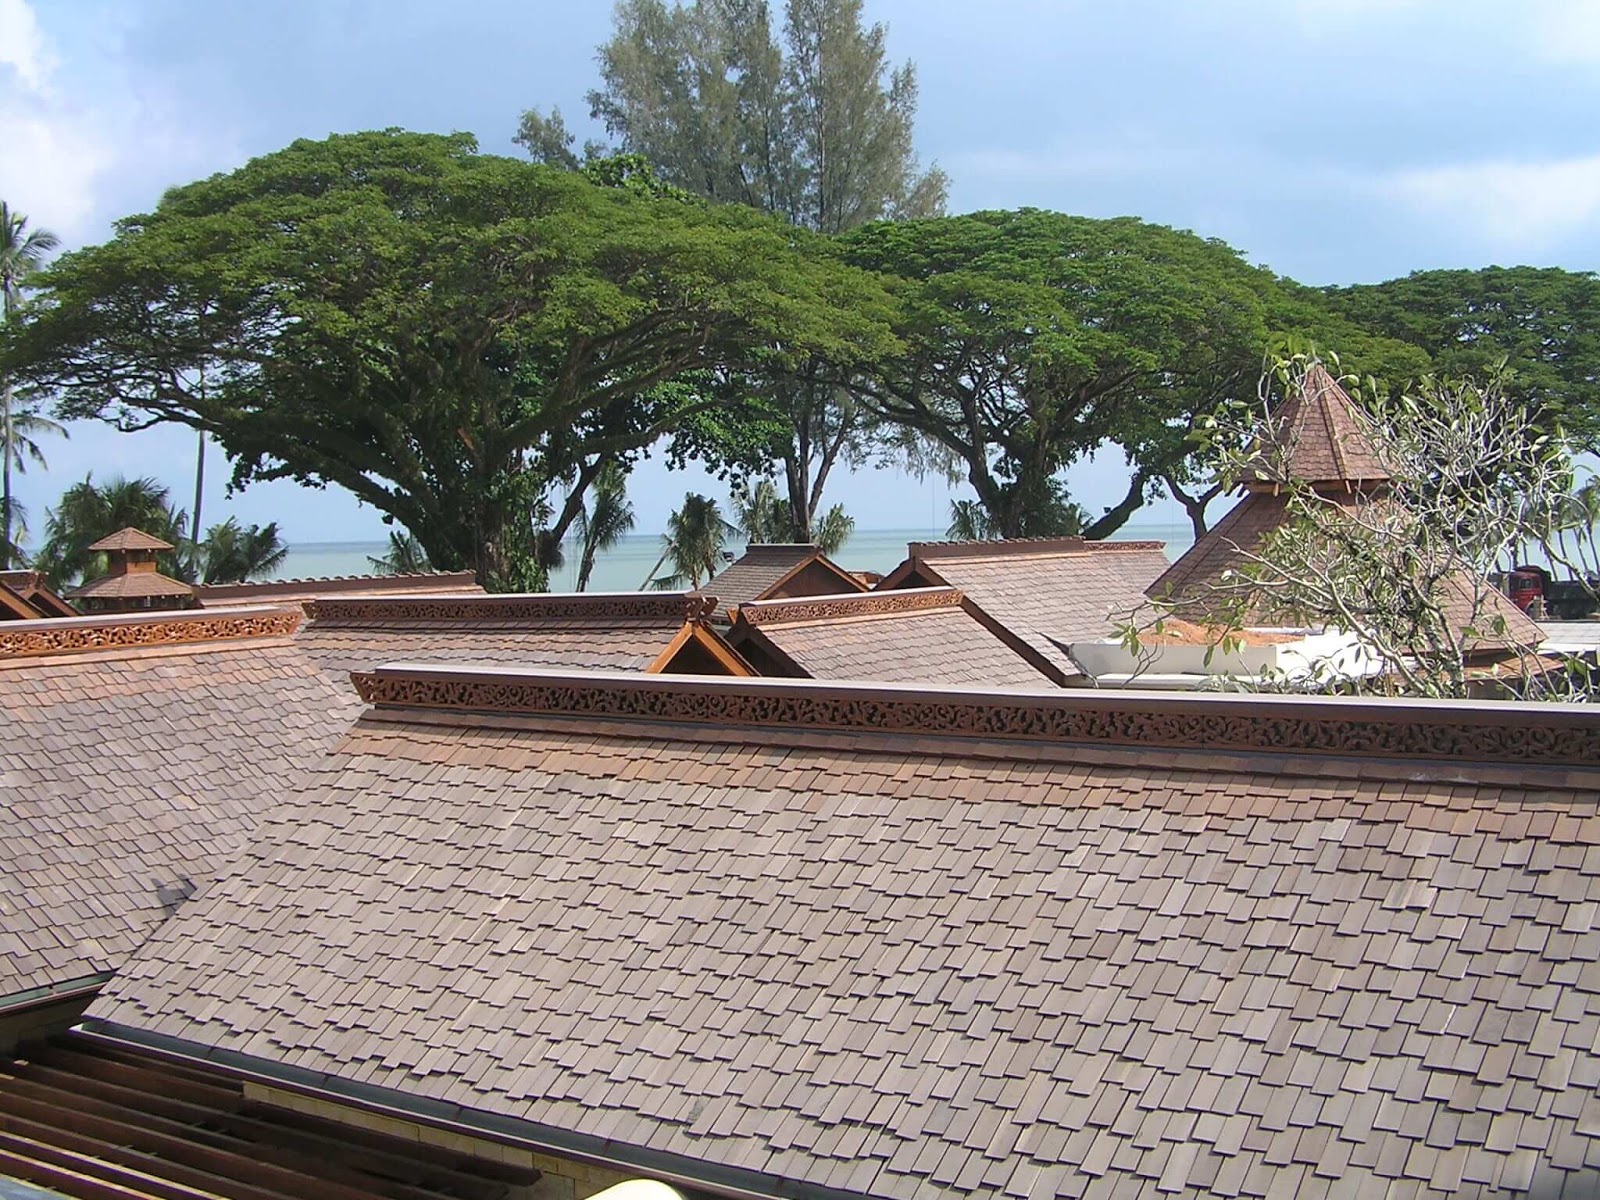 Wood shingles are popular for chalets and hotels to give it a "beach resort" feel